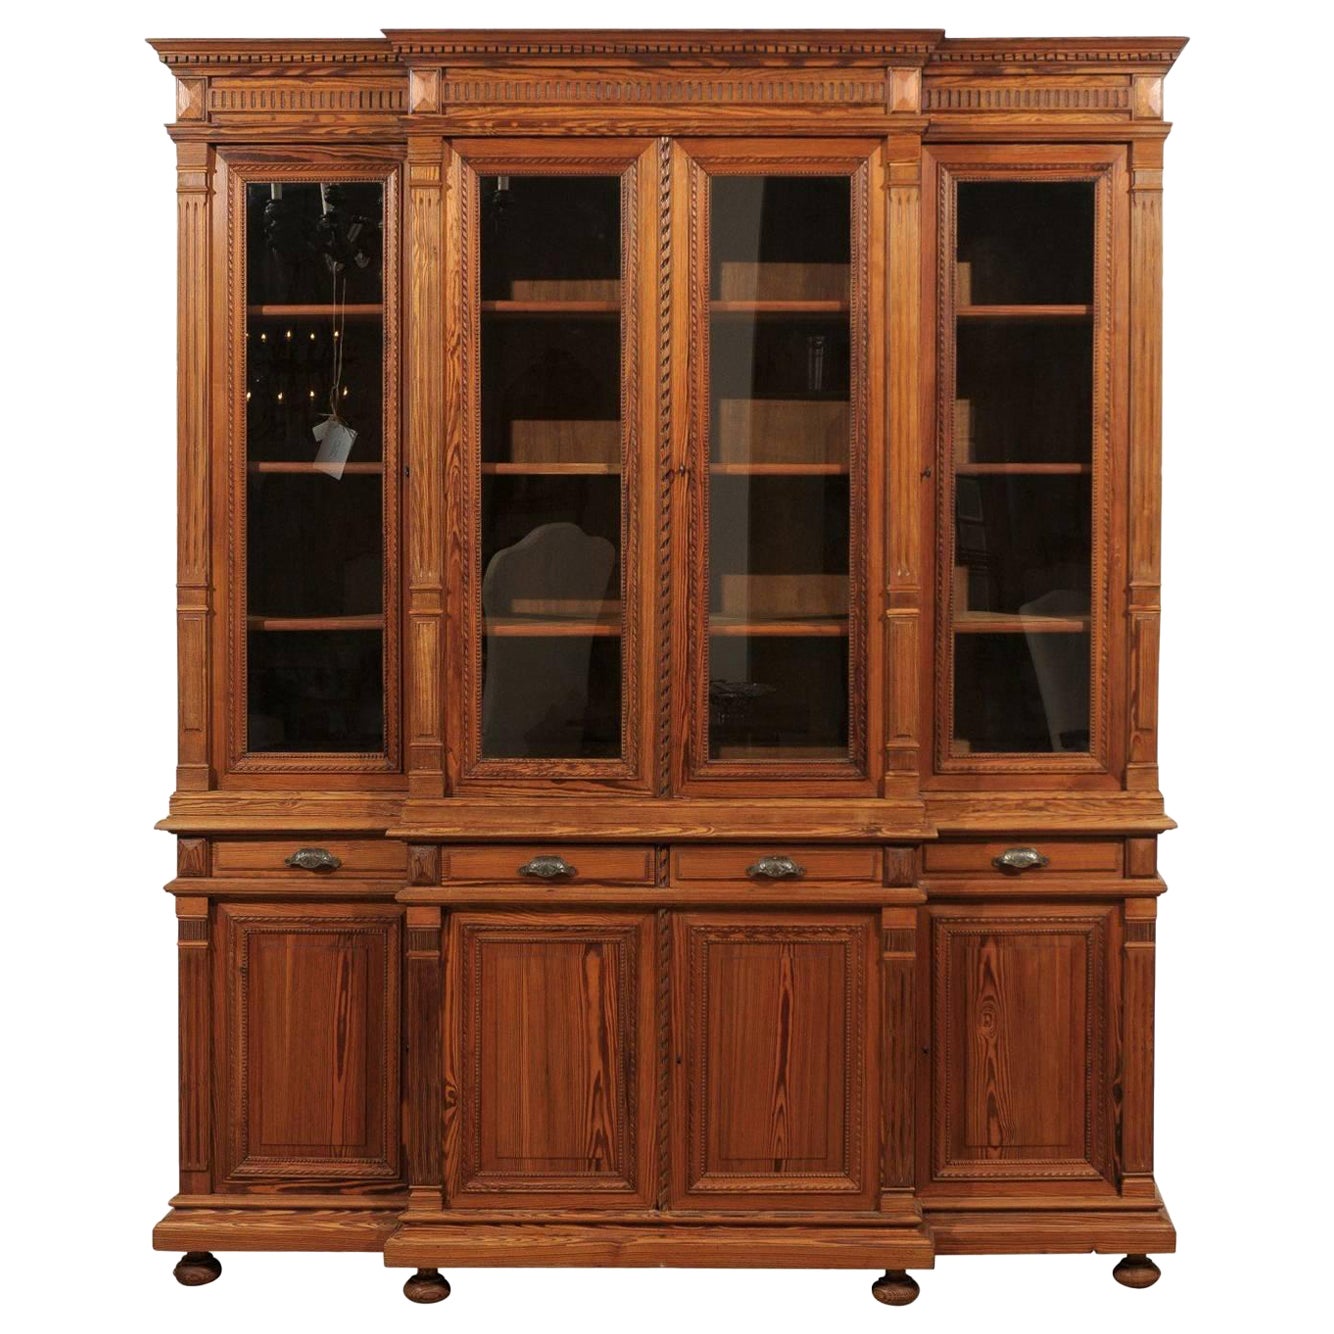 French Pitch Pine Glass Doors Breakfront Bookcase from the Turn of the Century